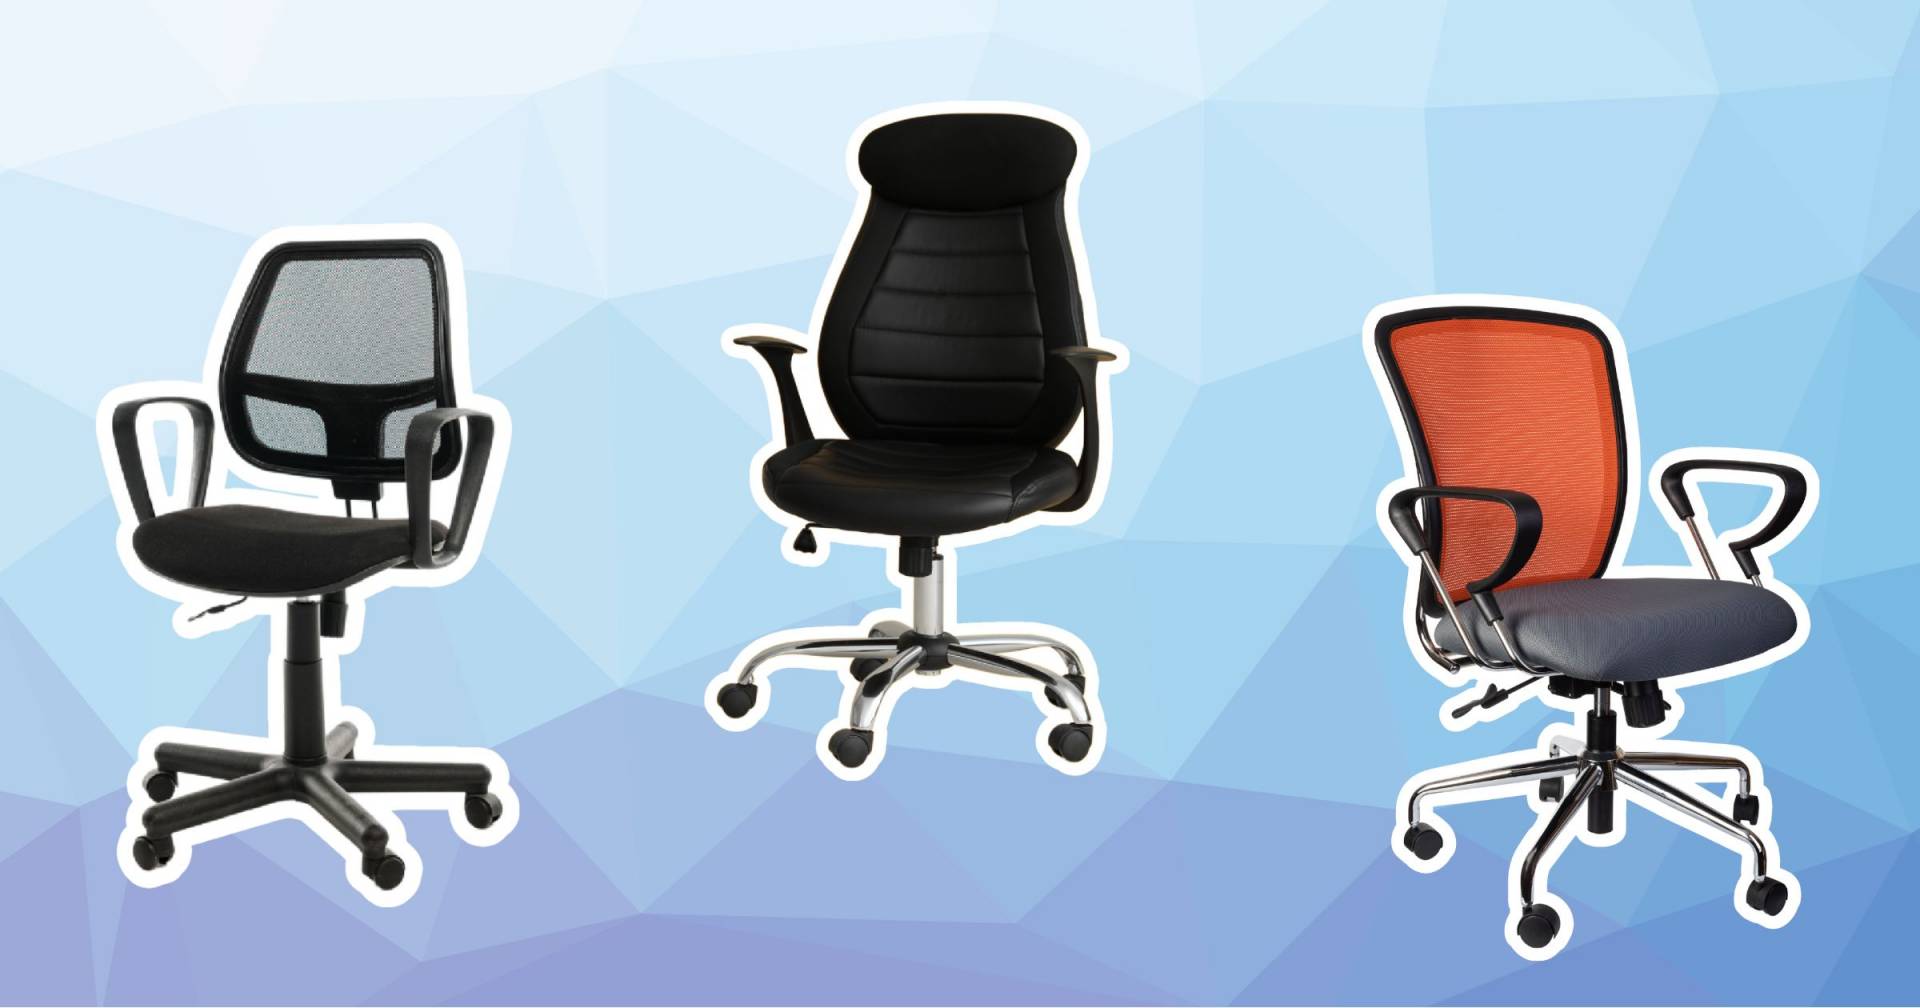 Best Value Office Chair 1681223615 1920 60 